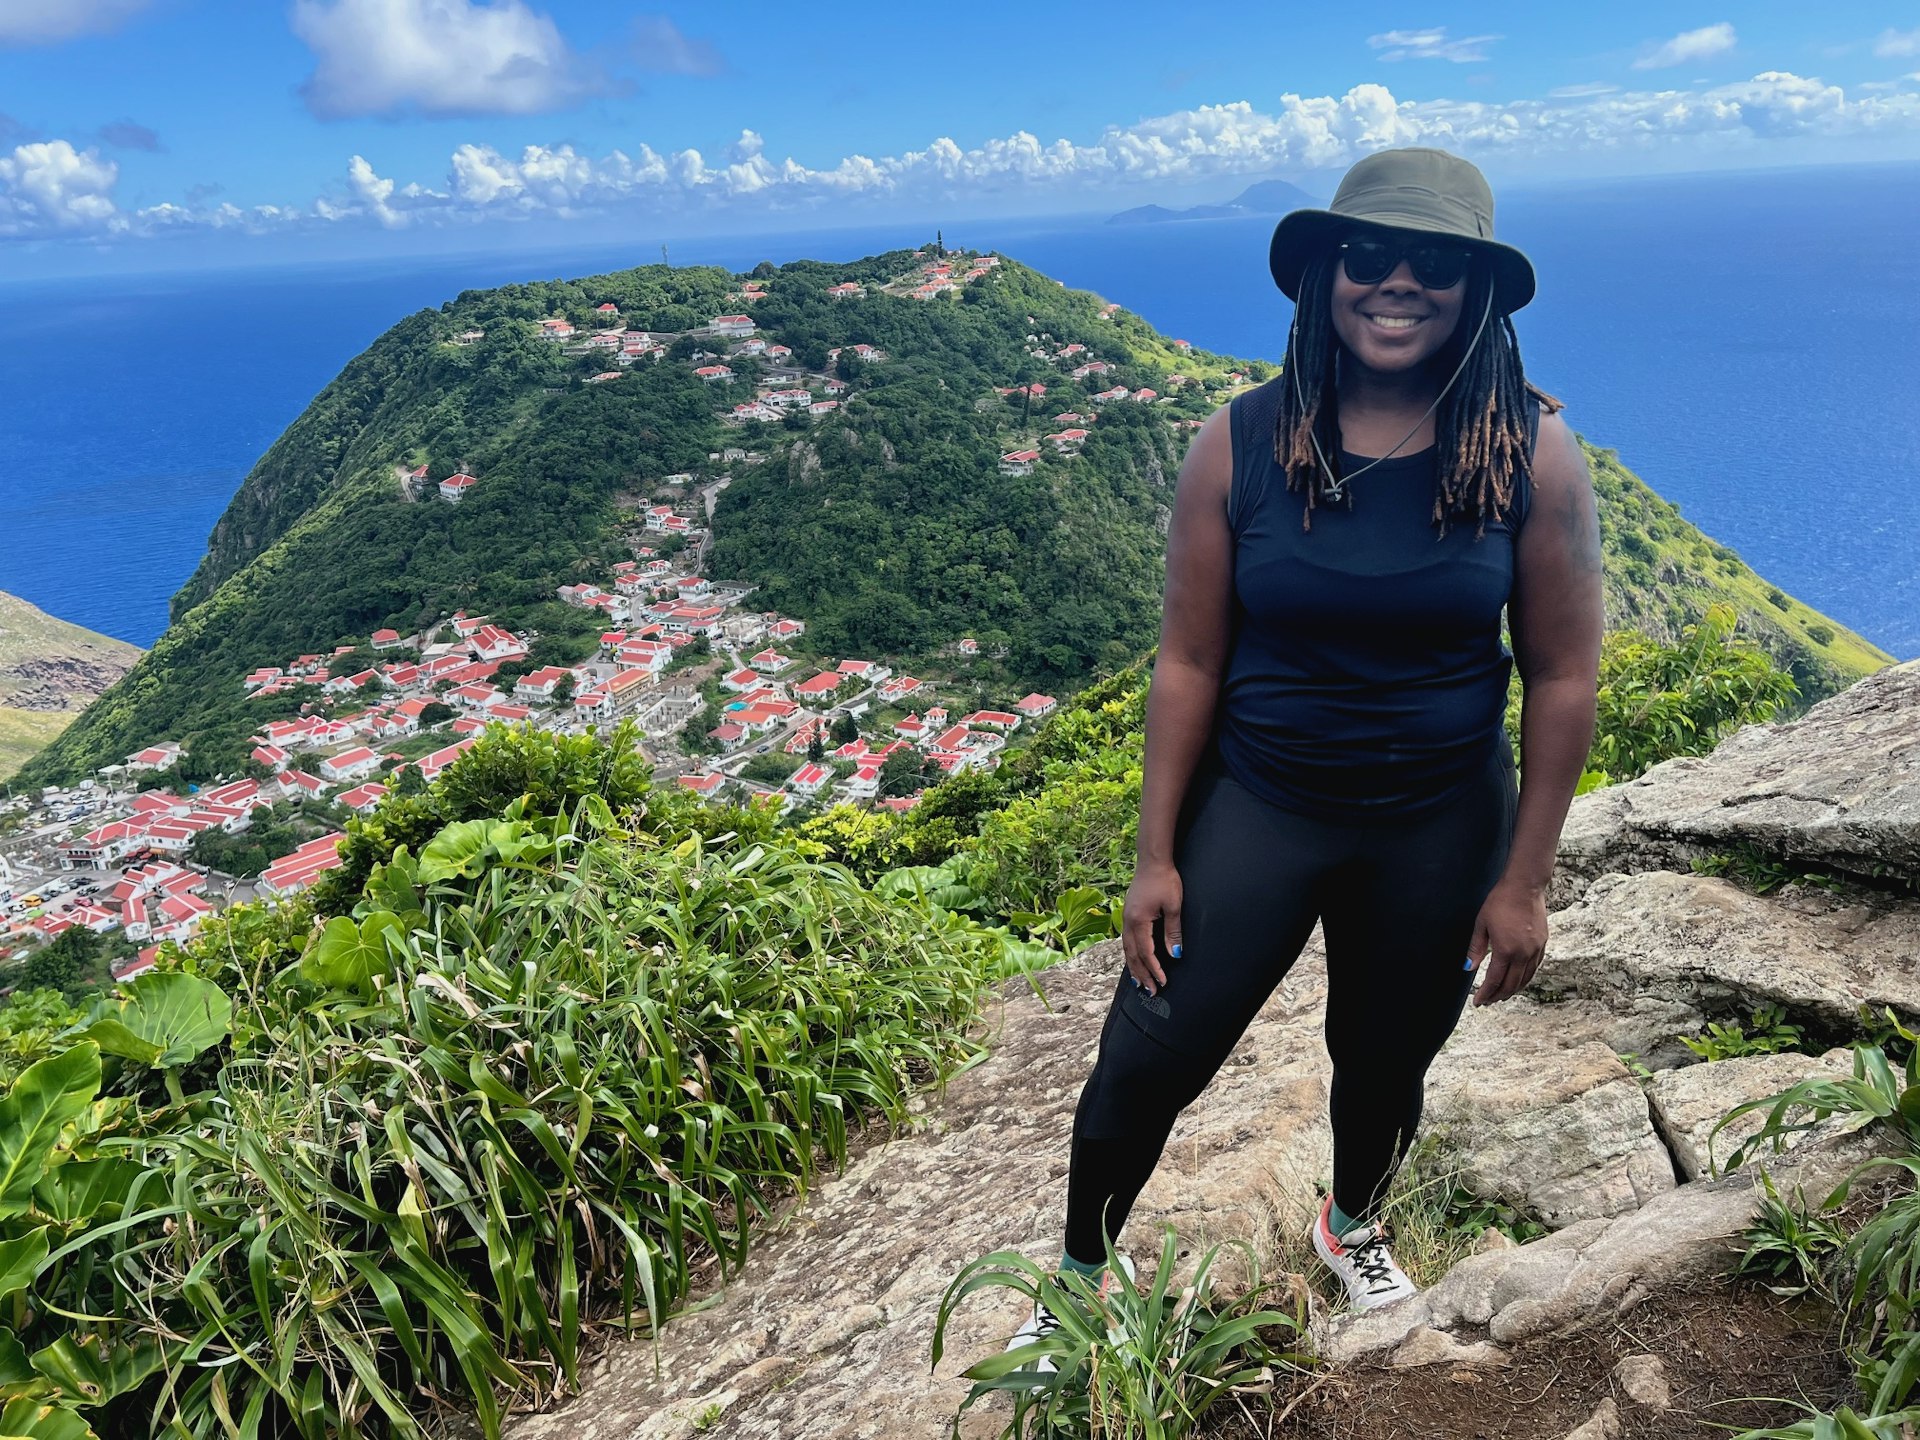 Lonely Planet Destination Editor Alicia Johnson faces the camera on the lookout point at Mas Cohones Hill on the Caribbean Island of Saba. In the background, there are the red rooftops of the Saban homes, a large hill and the expansive blue ocean. 